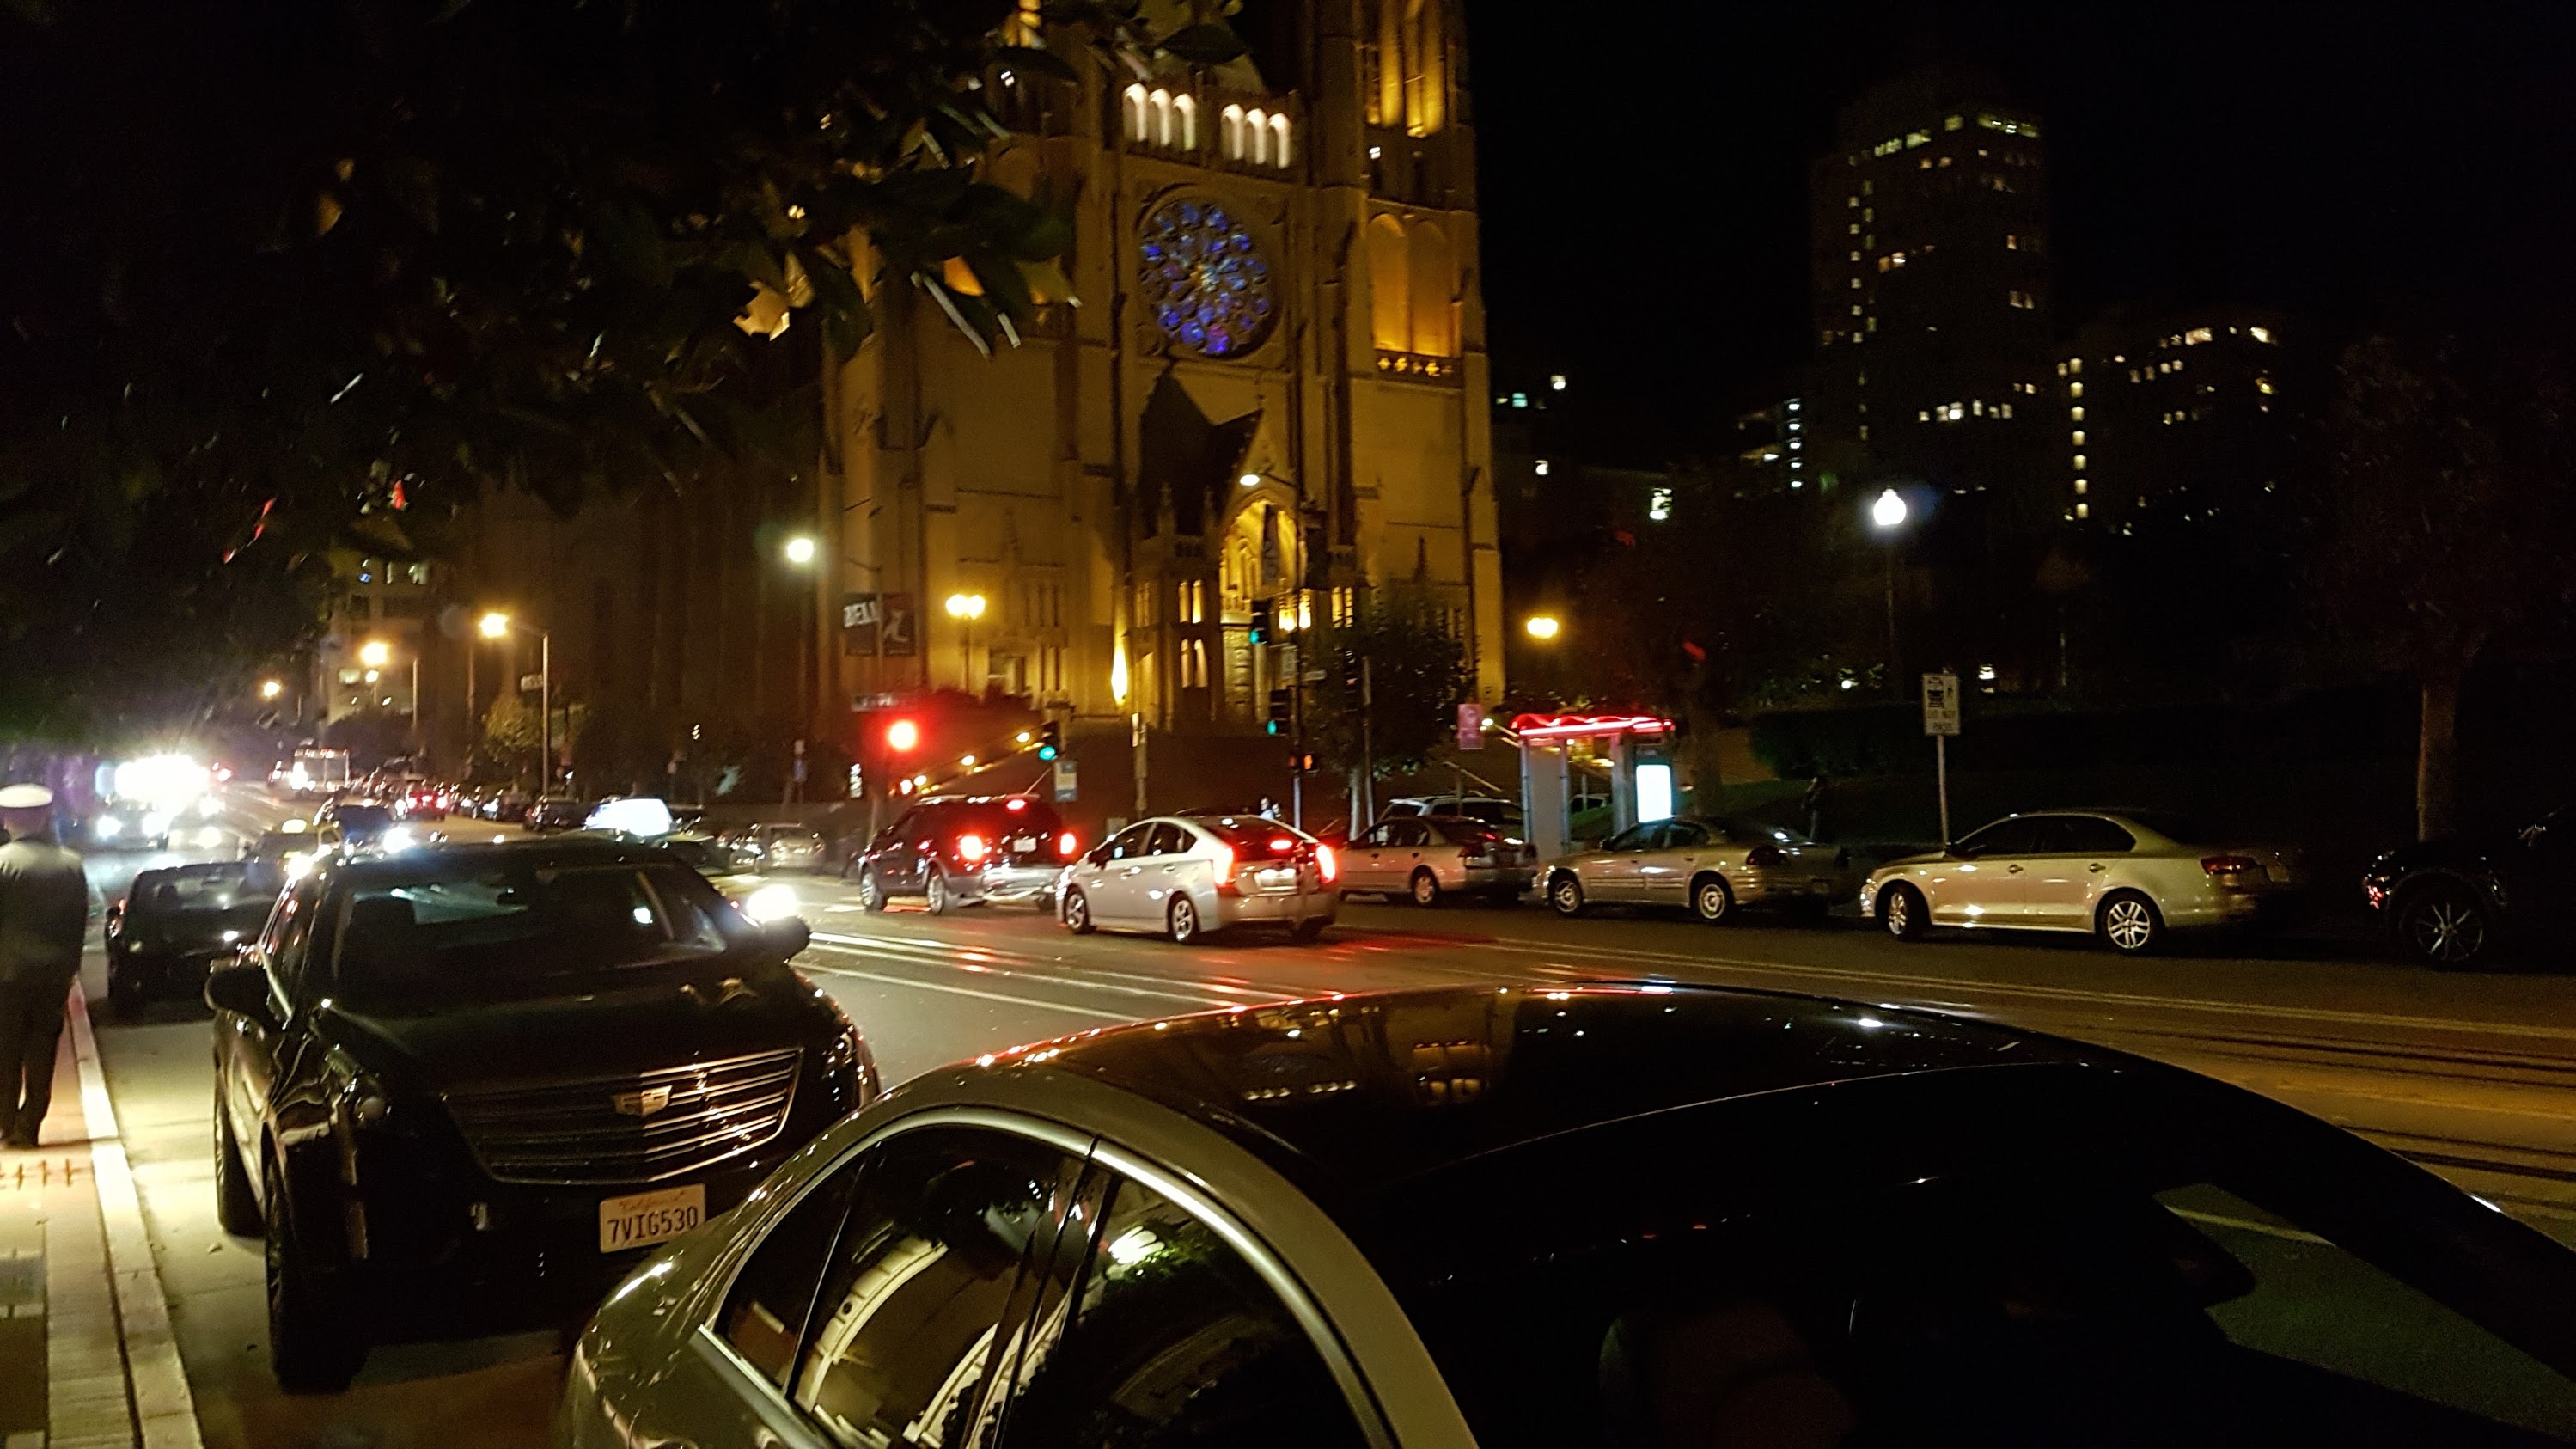 Grace Cathedral at night